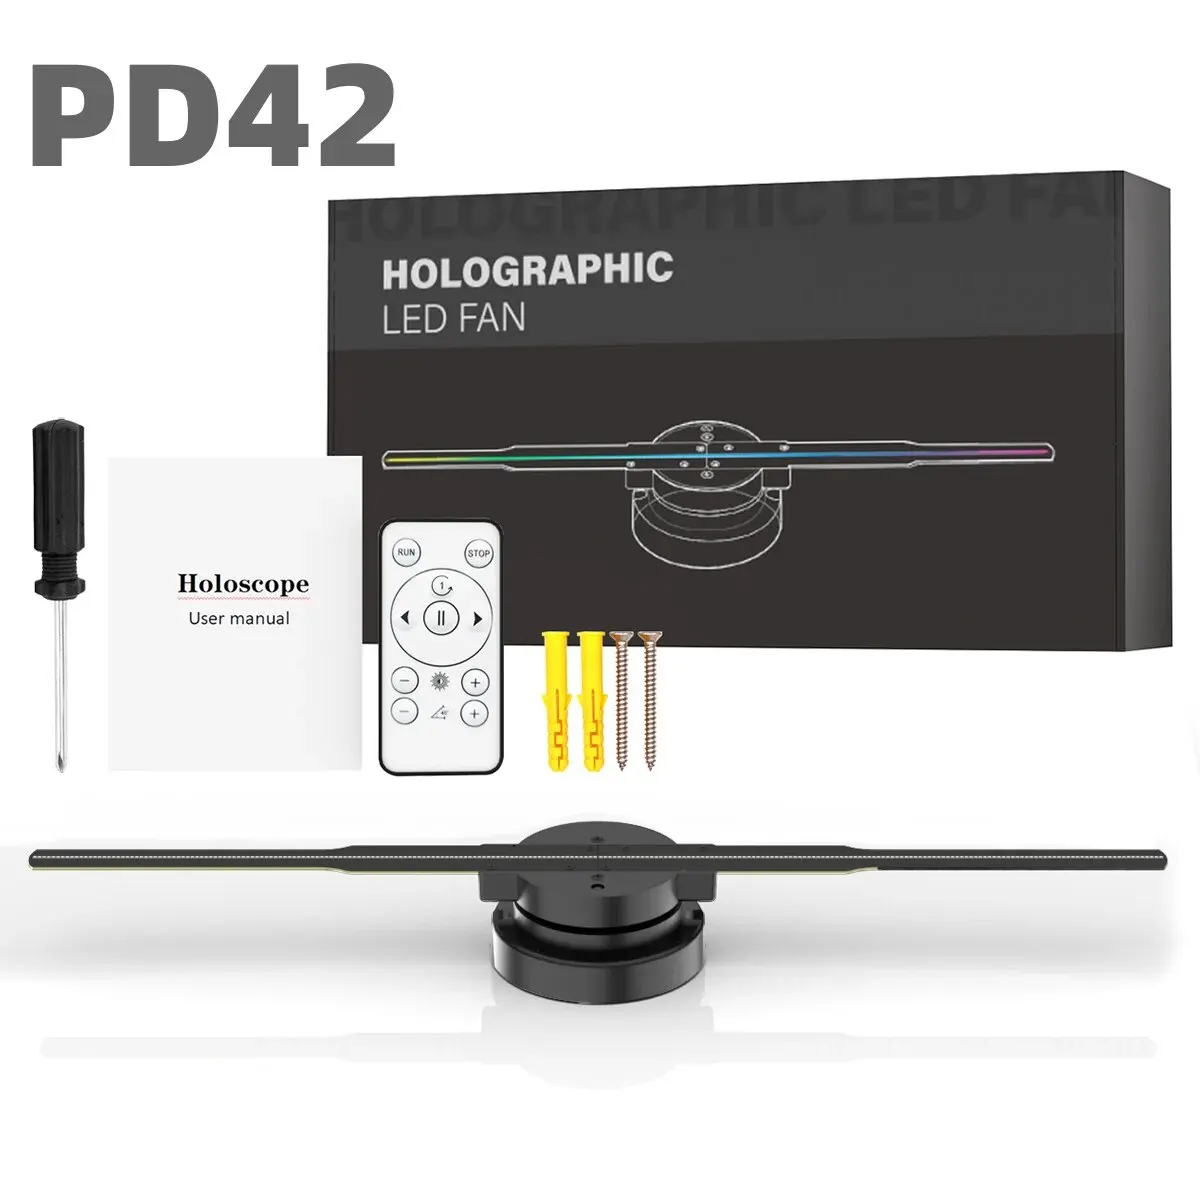 42cm-3D-HD-Hologram-Fan-Projector-SD-LED-Sign-Holographic-Player-Support-Image-Video-Shop-Bar